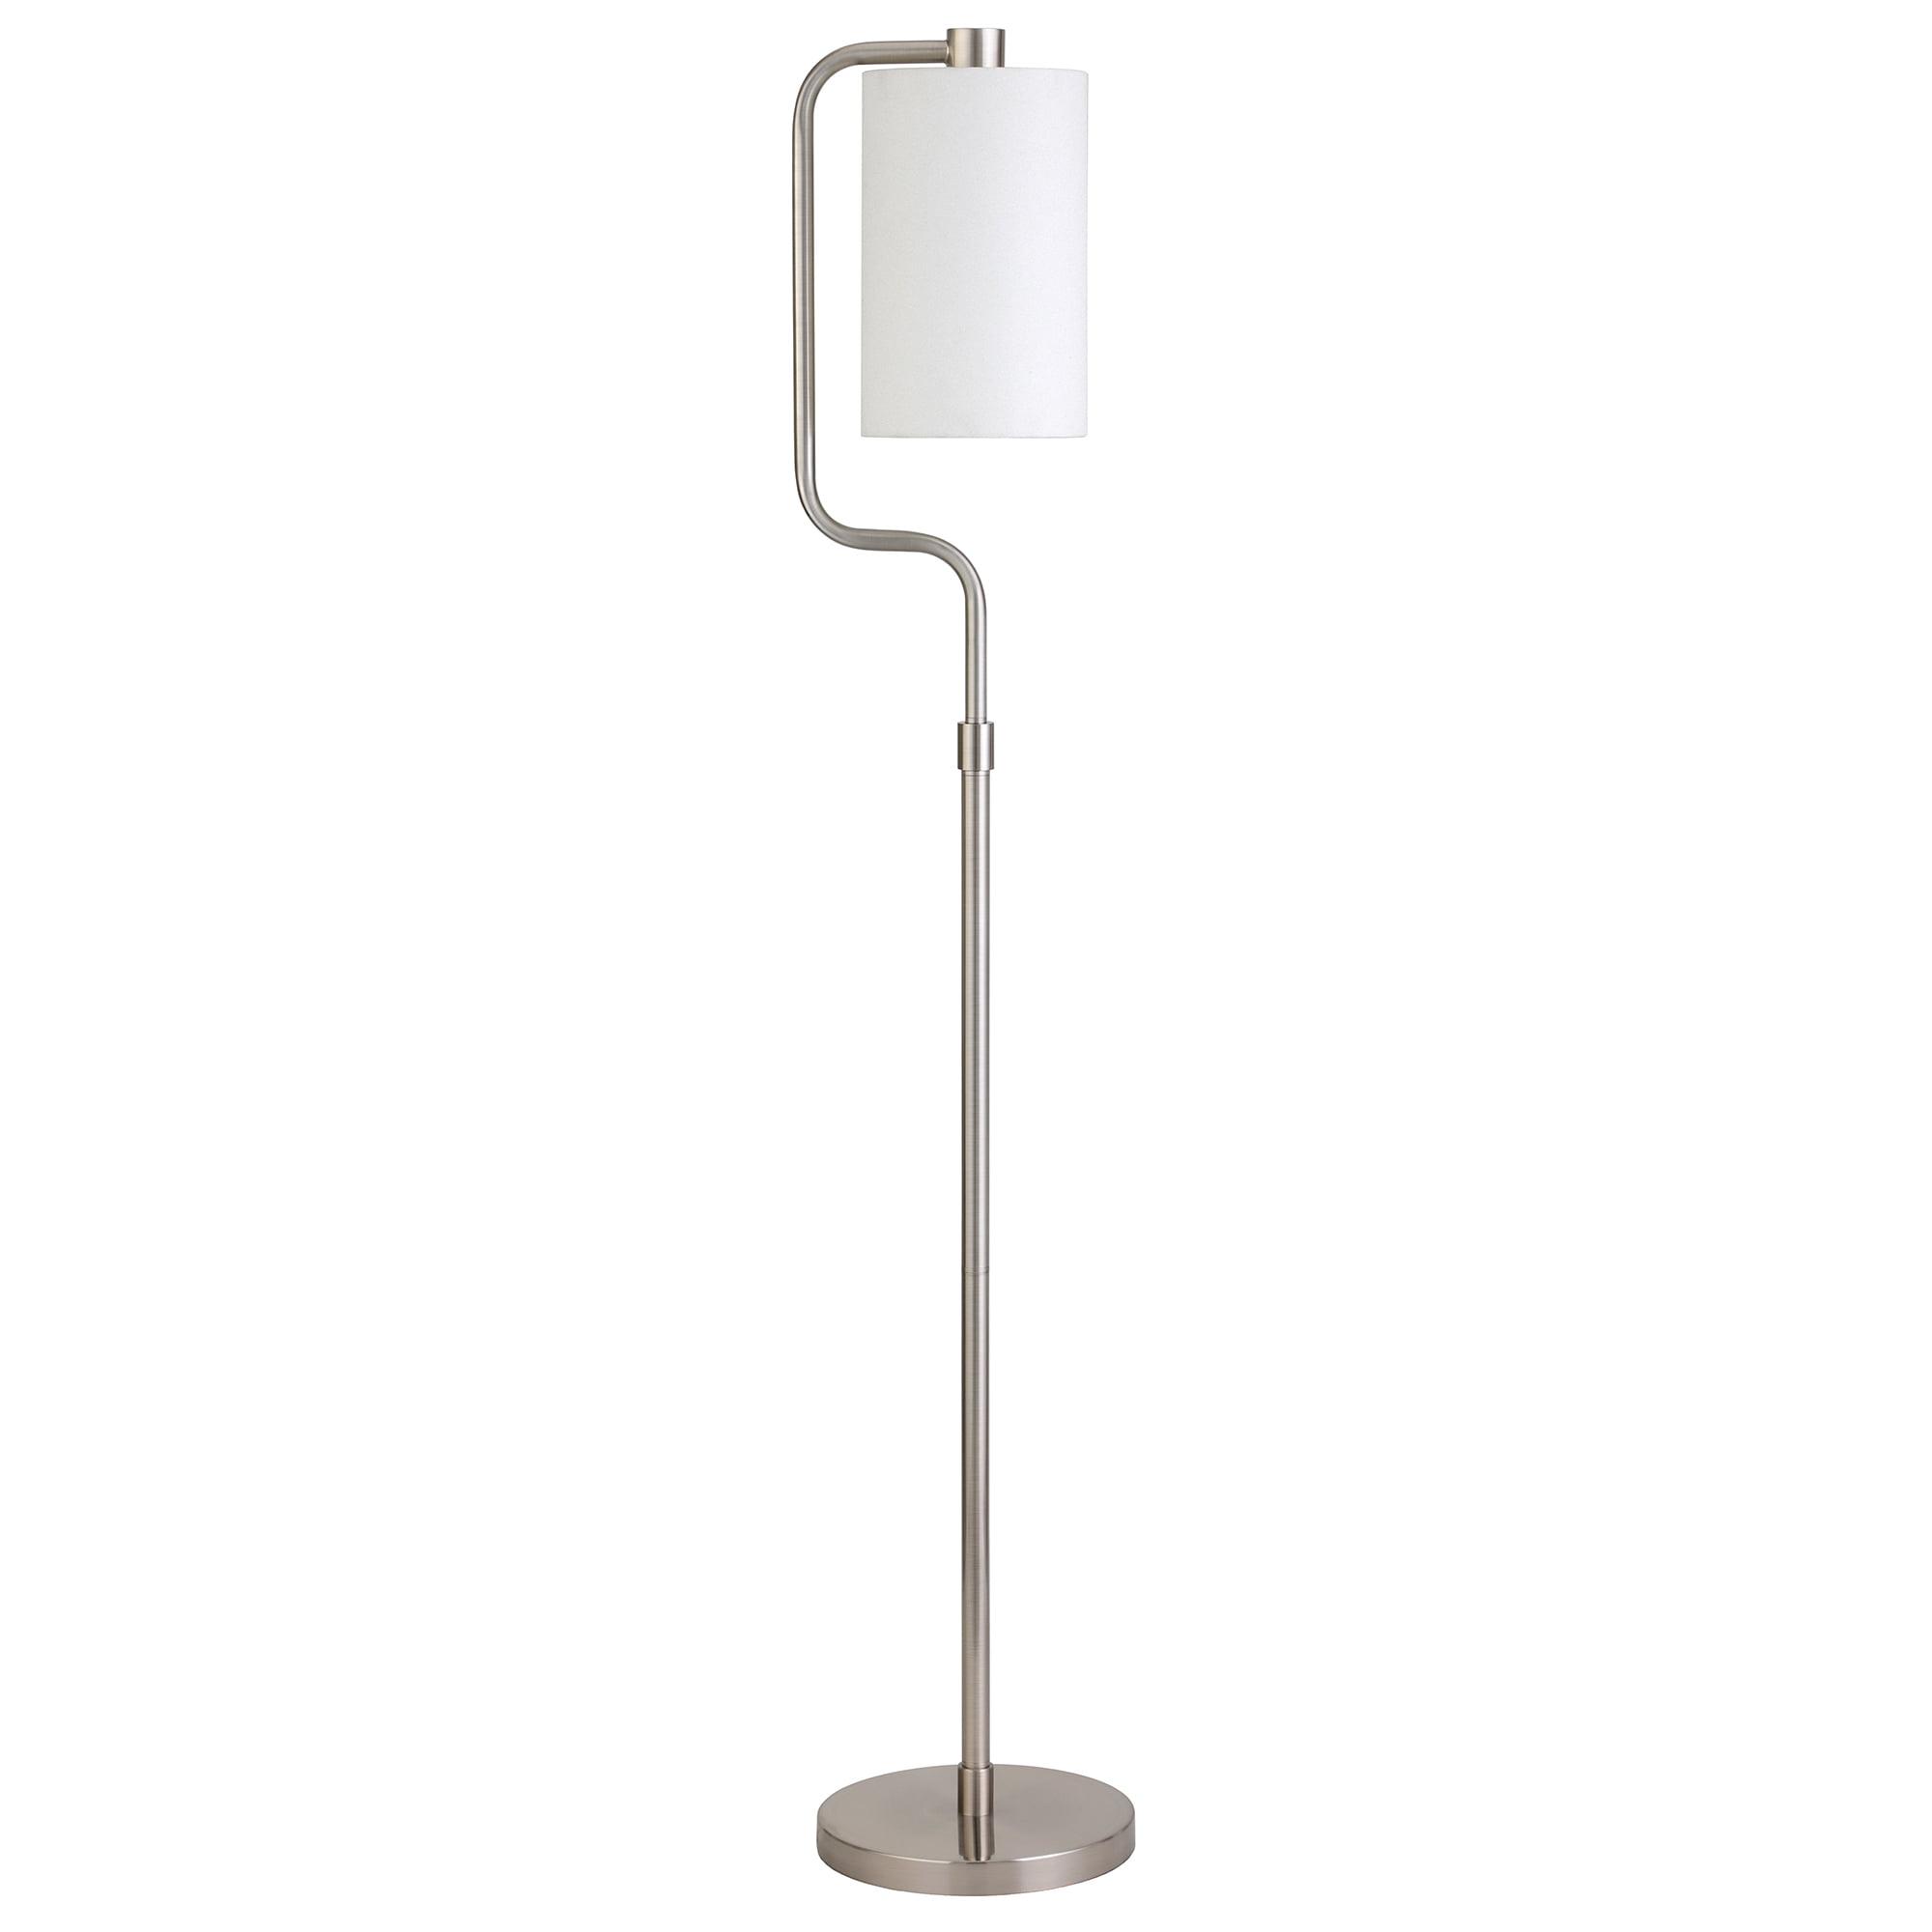 62" Brushed Nickel Floor Lamp with White Linen Shade